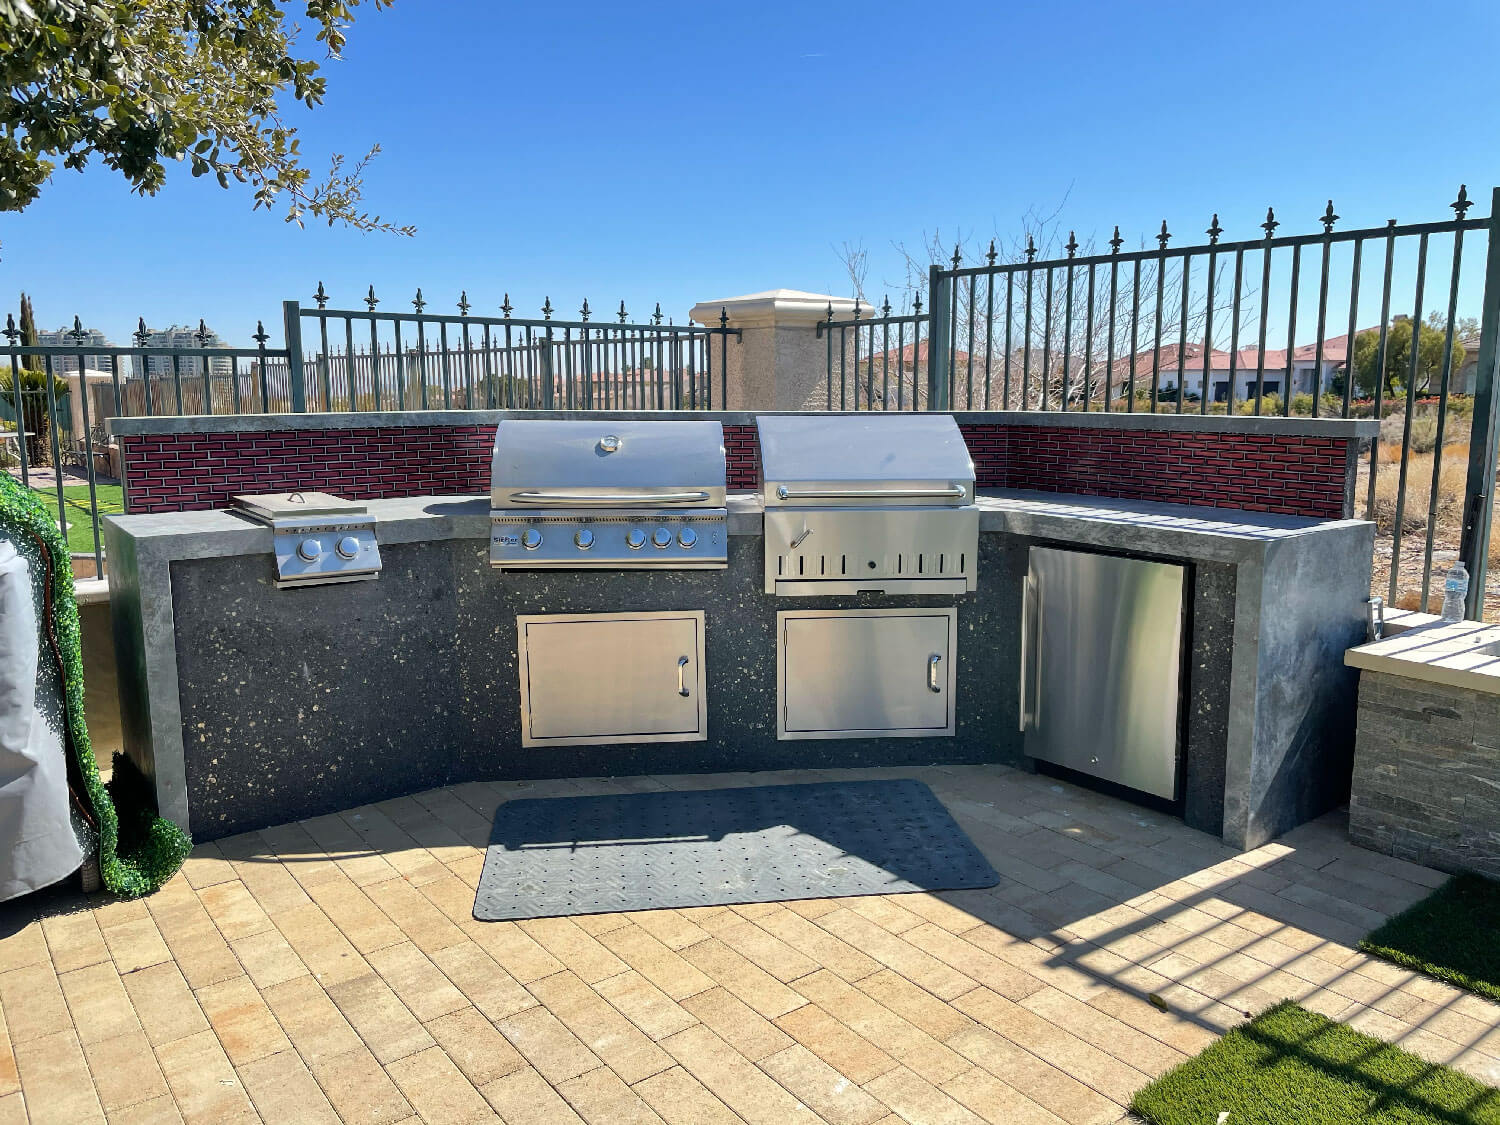 Custom Outdoor Kitchen by BBQ Concepts of Las Vegas, Nevada - Your source for professional outdoor kitchens, barbecue grills, components, and accessories